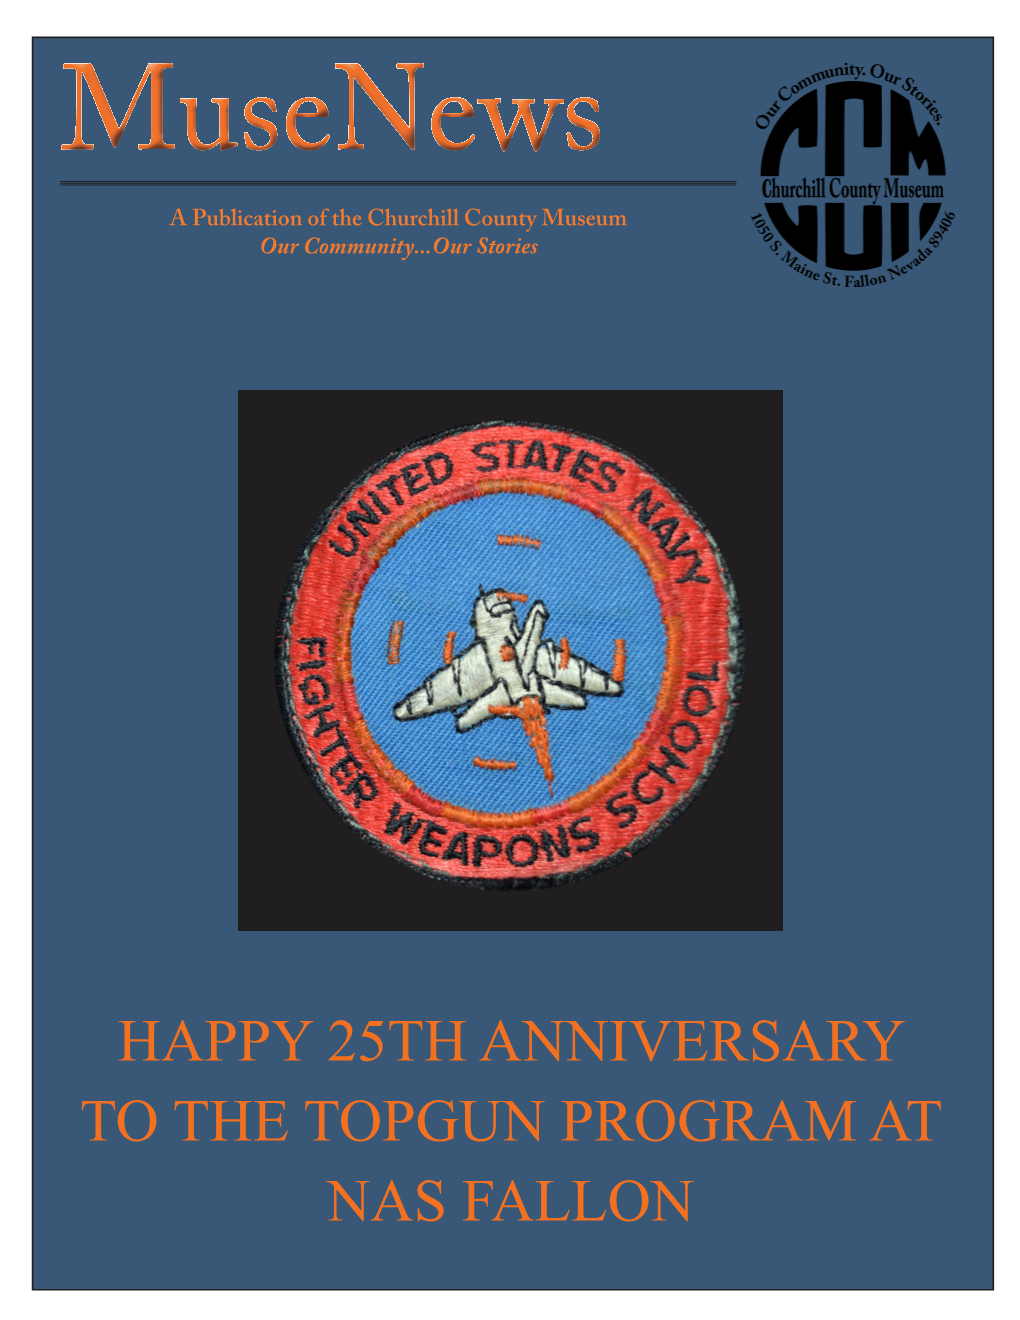 HAPPY 25TH ANNIVERSARY to the TOPGUN PROGRAM at NAS FALLON Beatrice Badger “Digs In” Beatrice Badger Is the Beloved Mascot of the Churchill County Museum